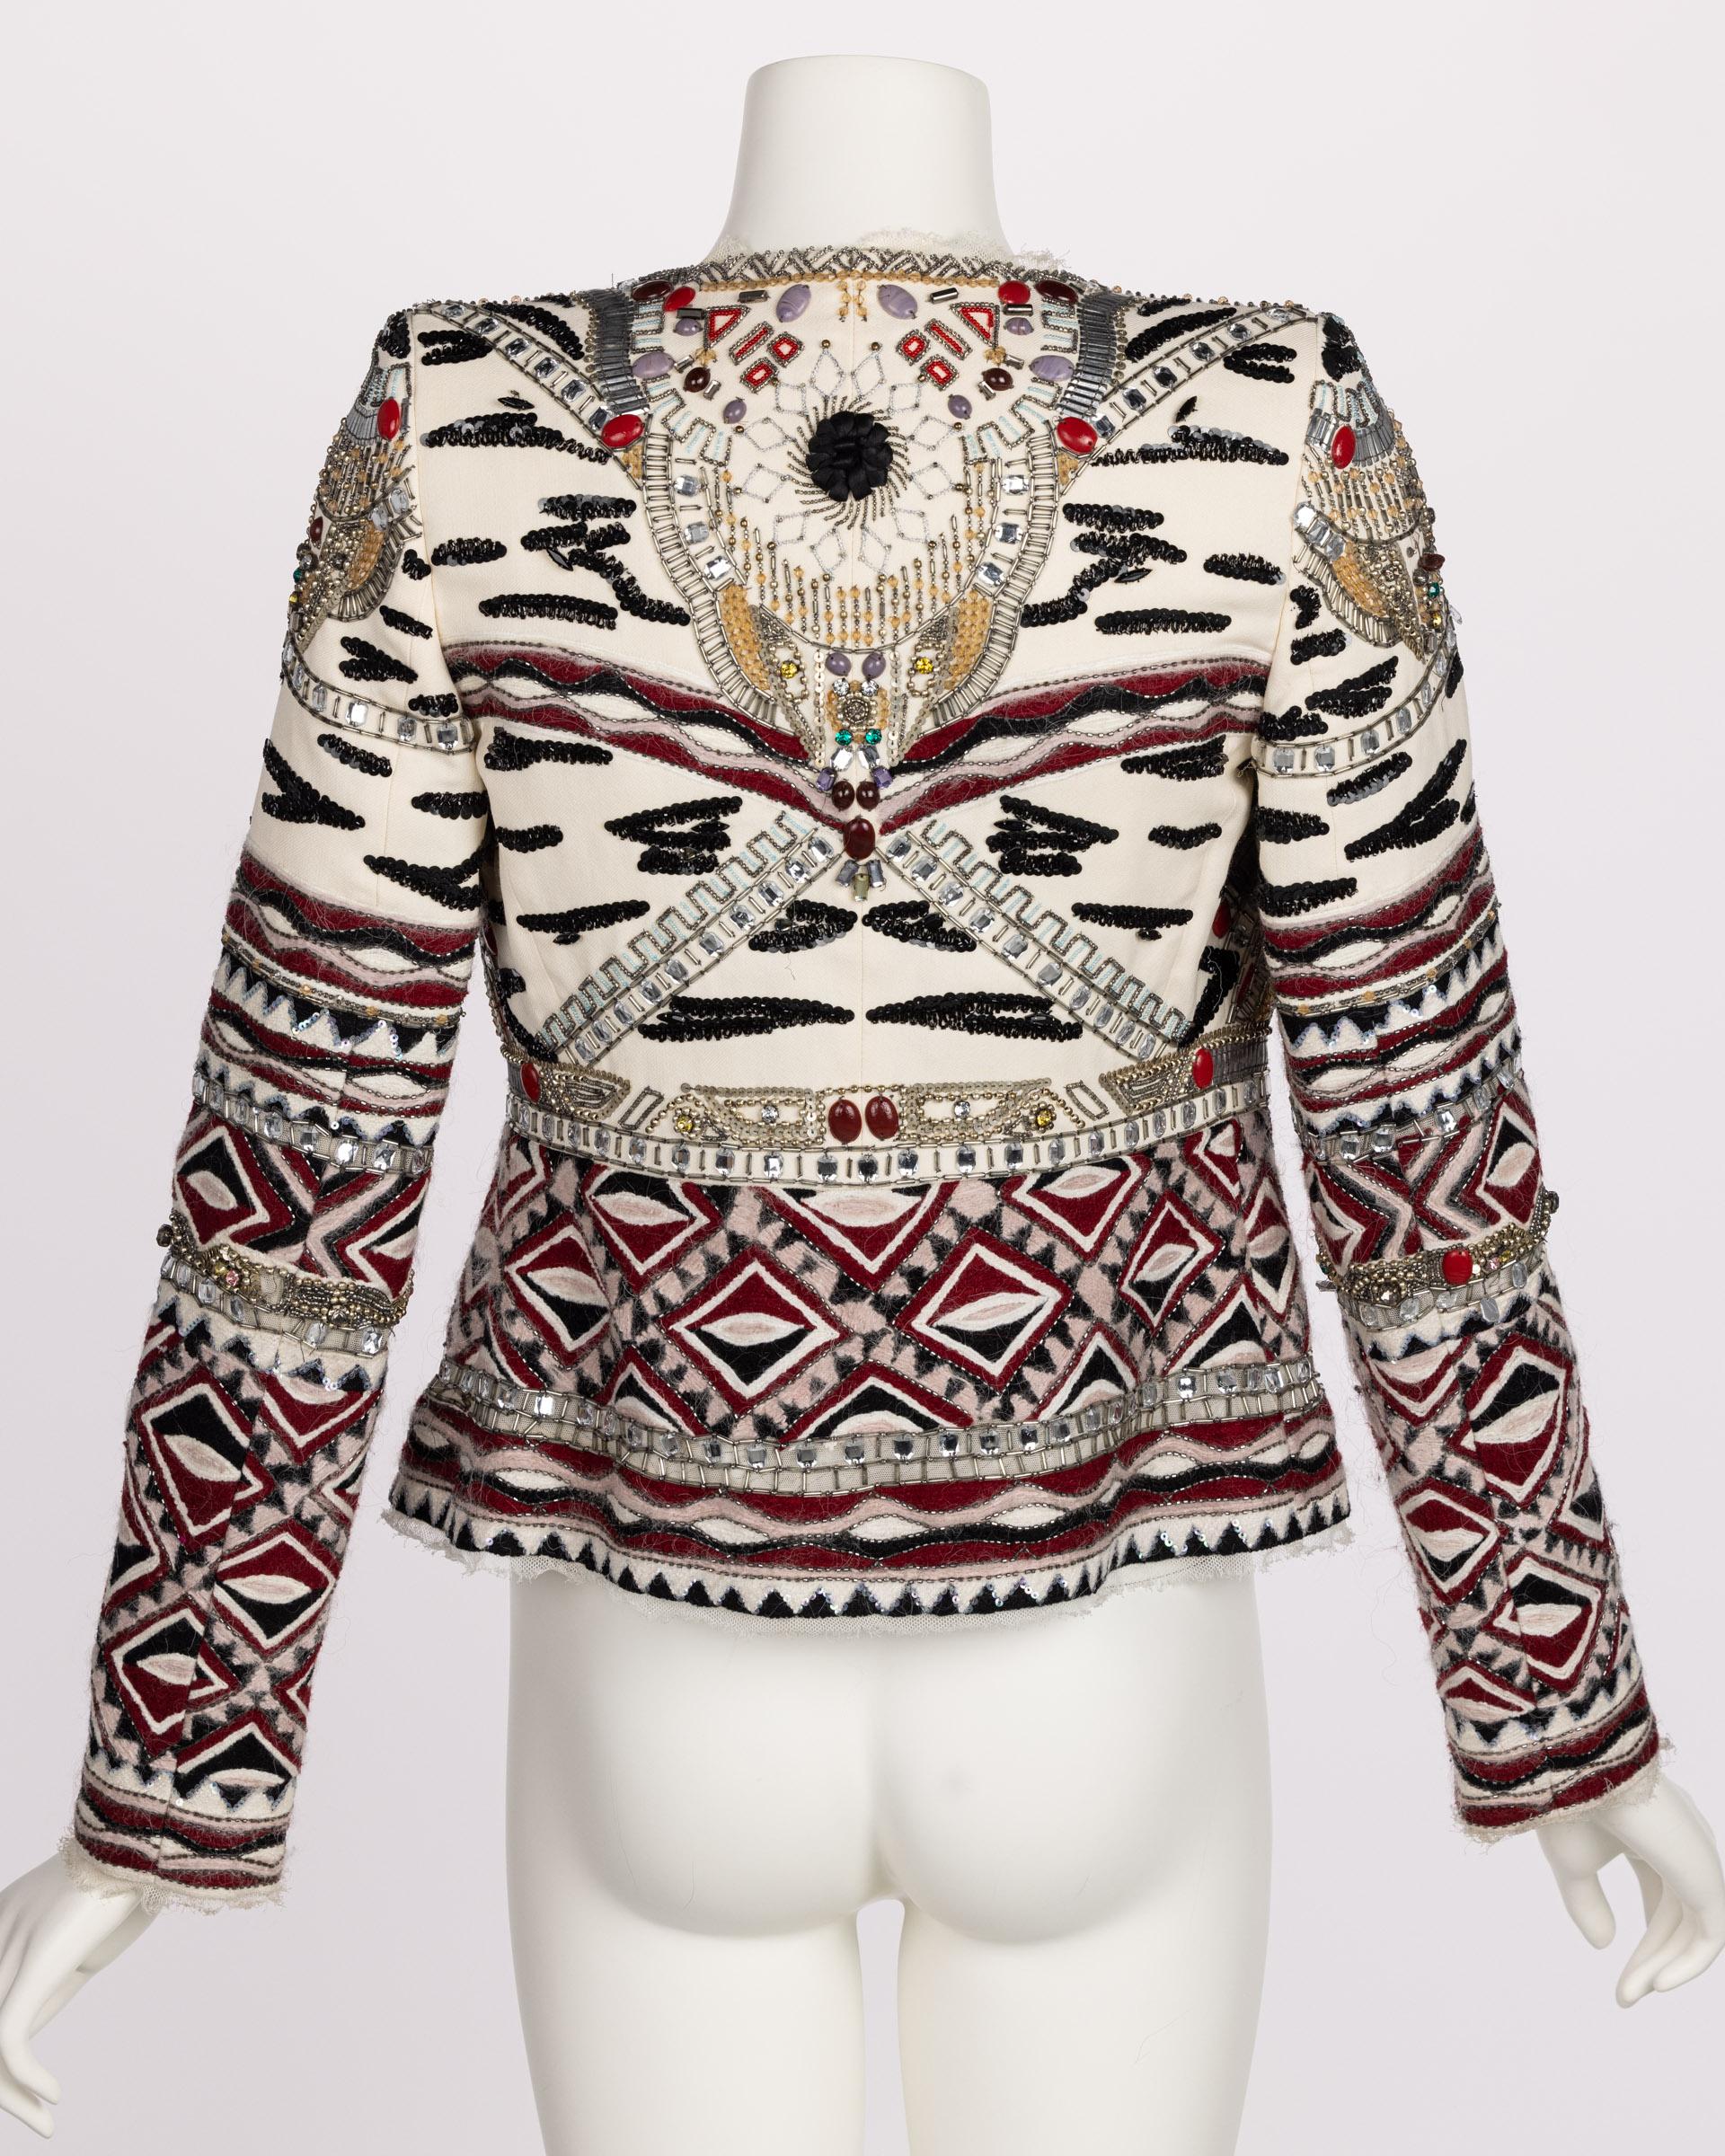 Women's or Men's  Emilio Pucci Embellished Wool Silk & Cotton Blend Jacket, Pre -Fall 2012 Runway